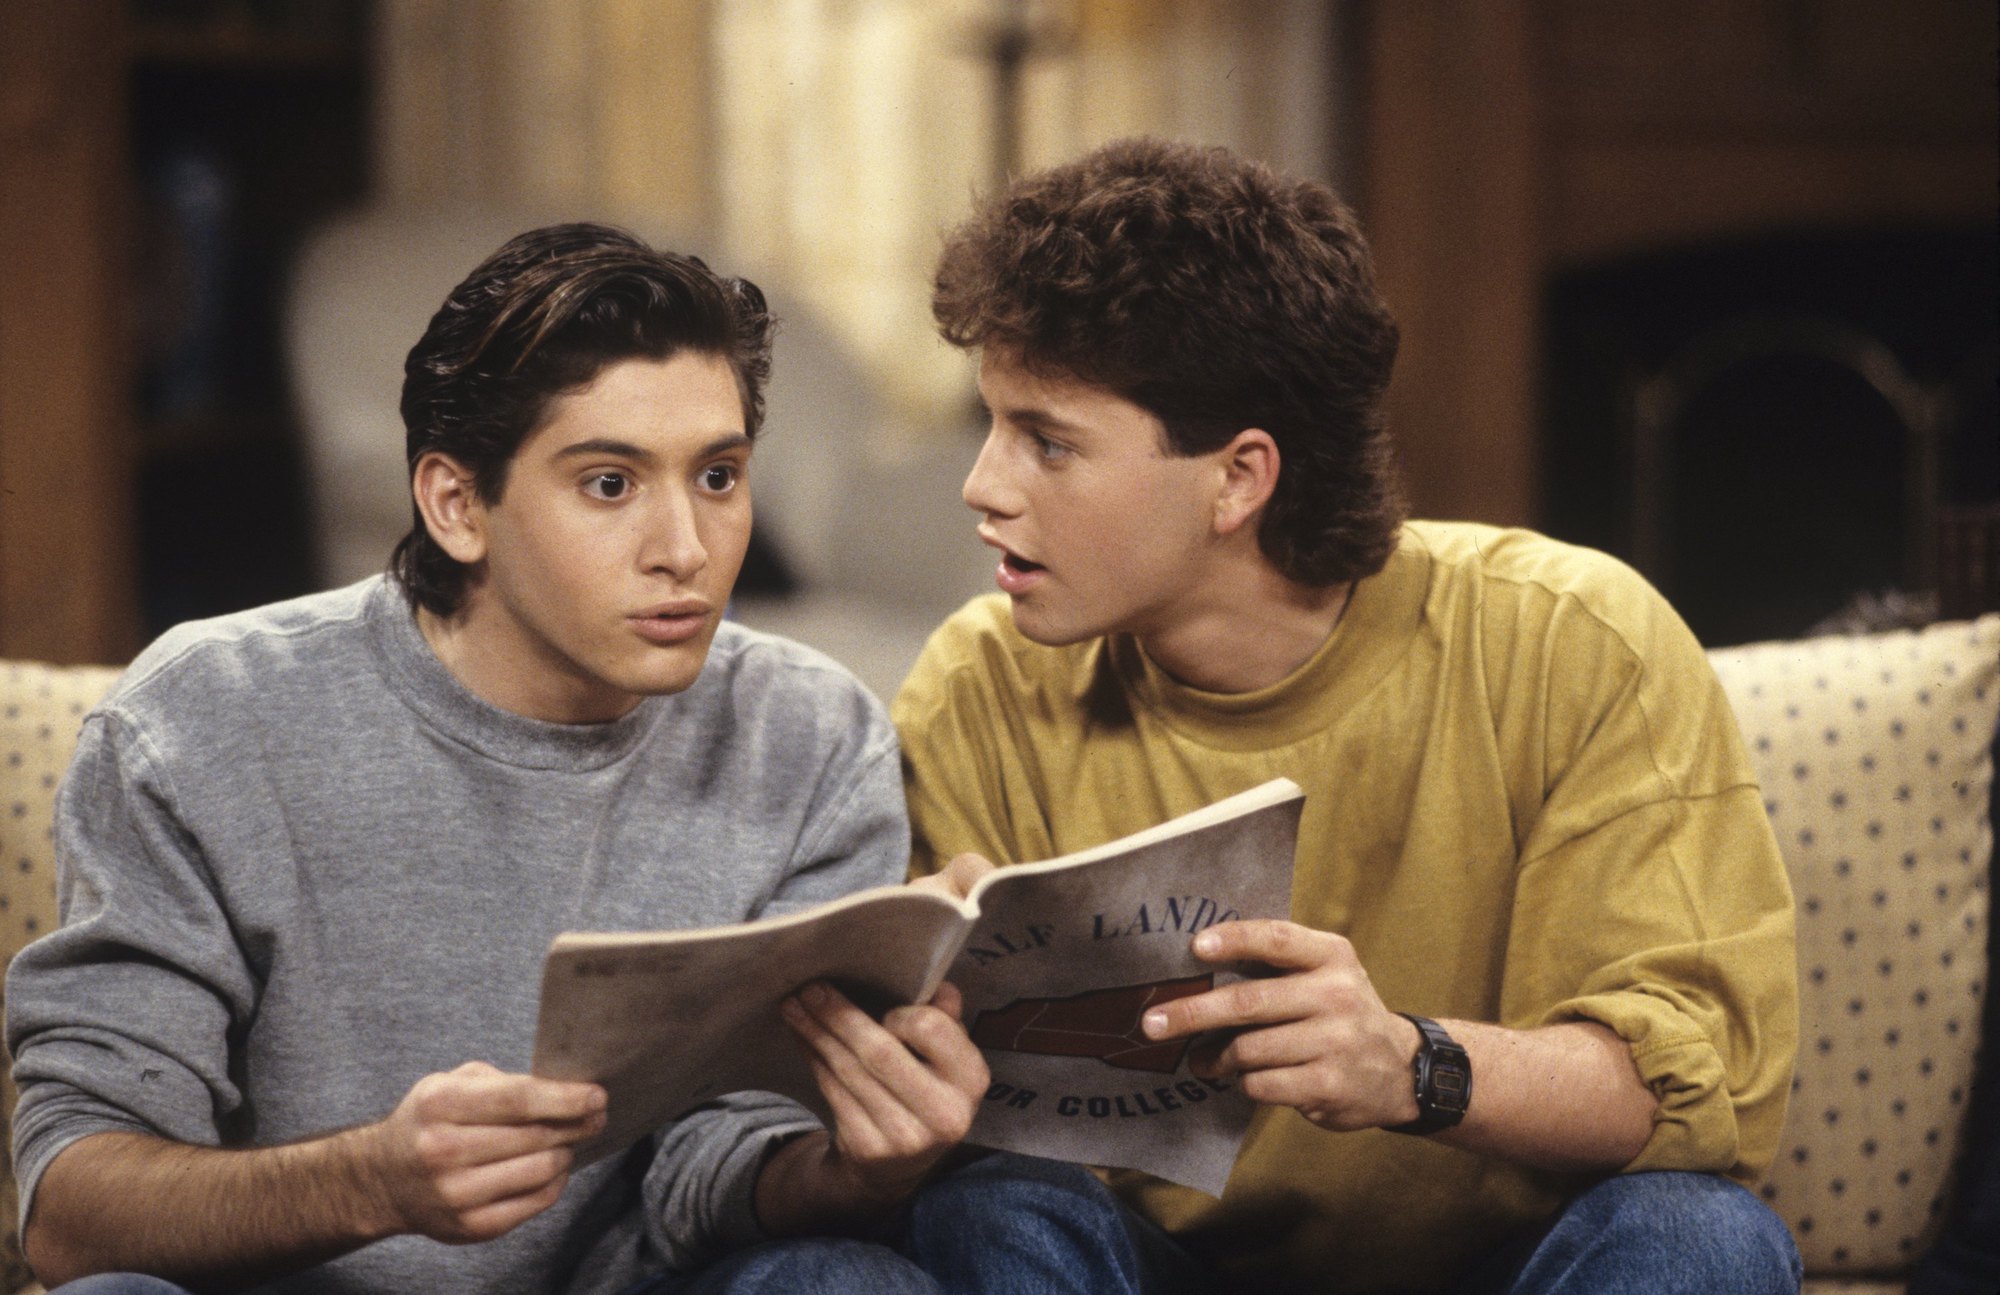 (L-R) Andrew Koenig and Kirk Cameron on 'Growing Pains' sitting on a couch